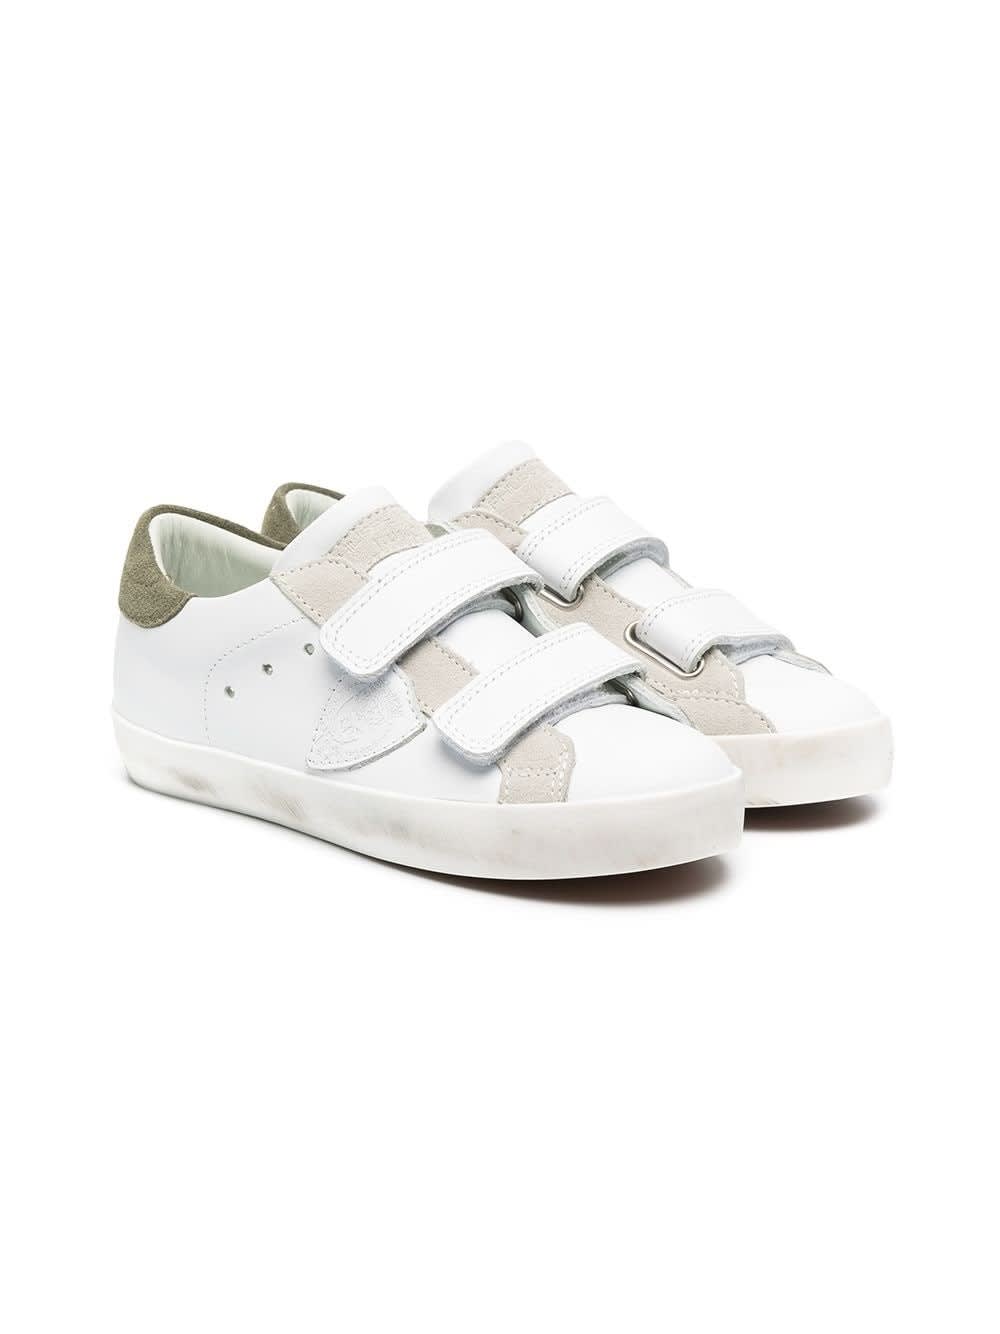 Philippe Model Paris Sportif Sneakers With Suede Inlays